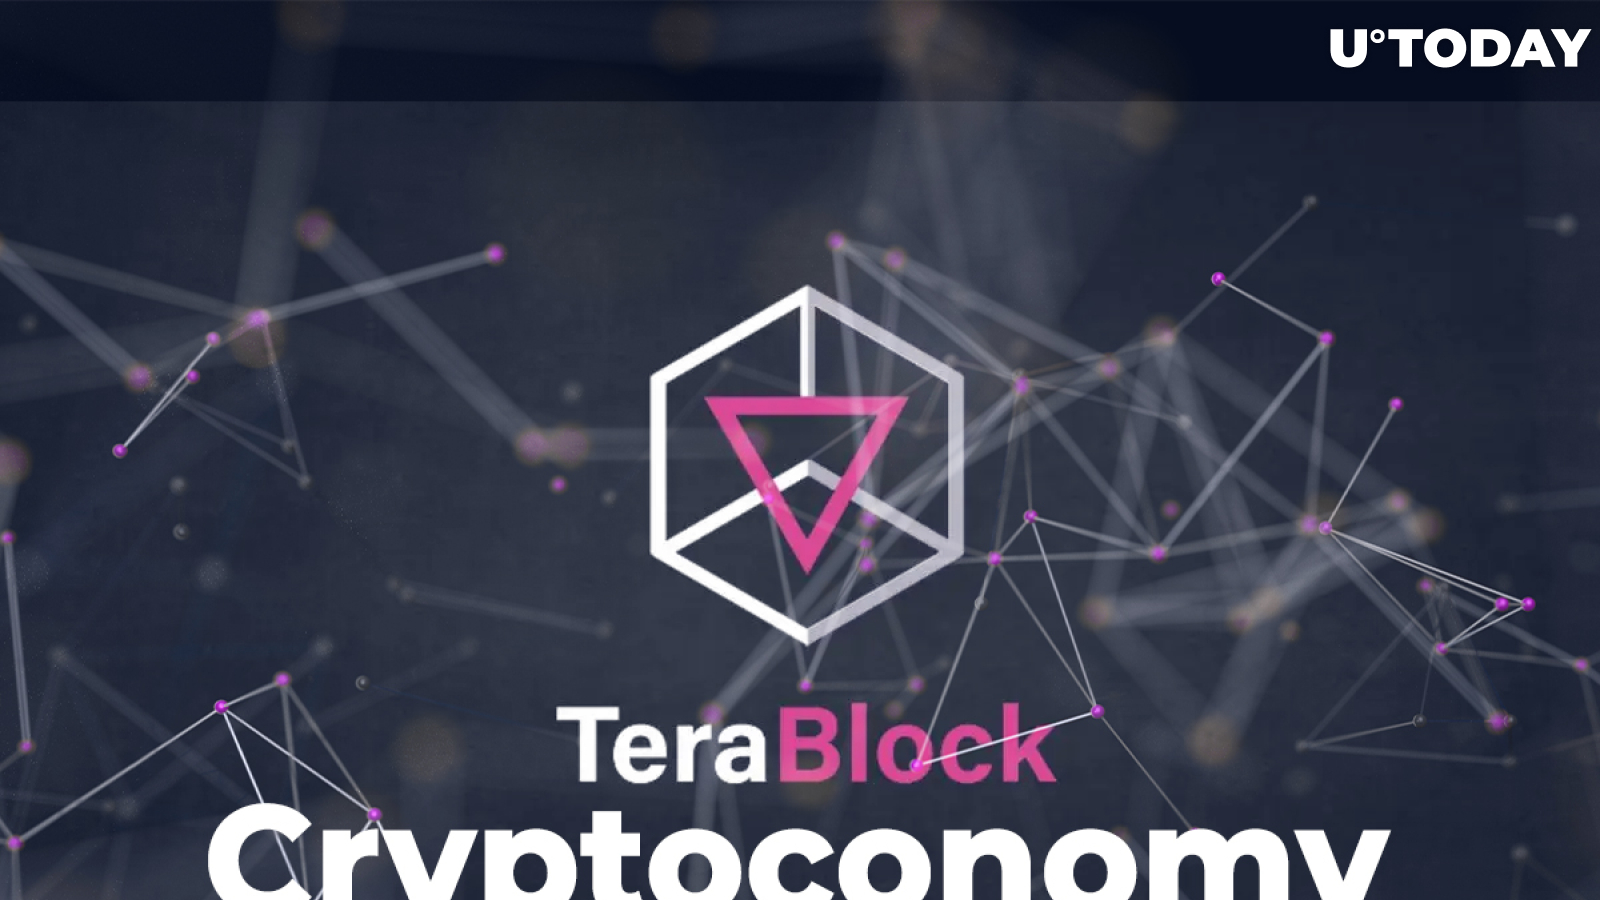 TeraBlock's Exchange Onboards Newcomers to the Cryptoconomy